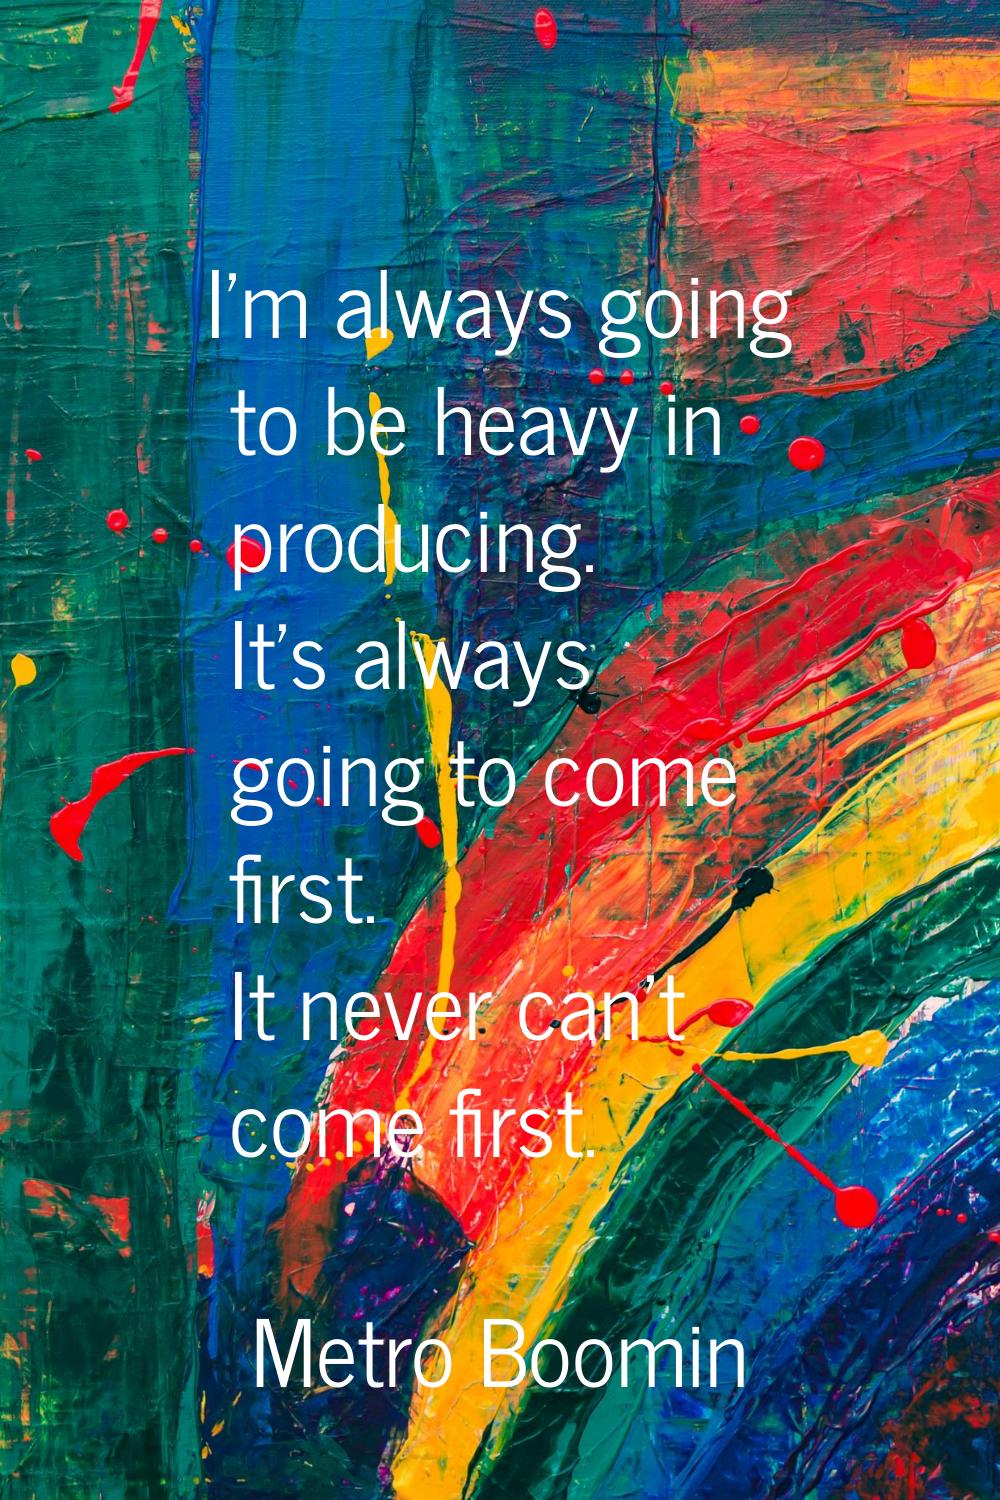 I'm always going to be heavy in producing. It's always going to come first. It never can't come fir